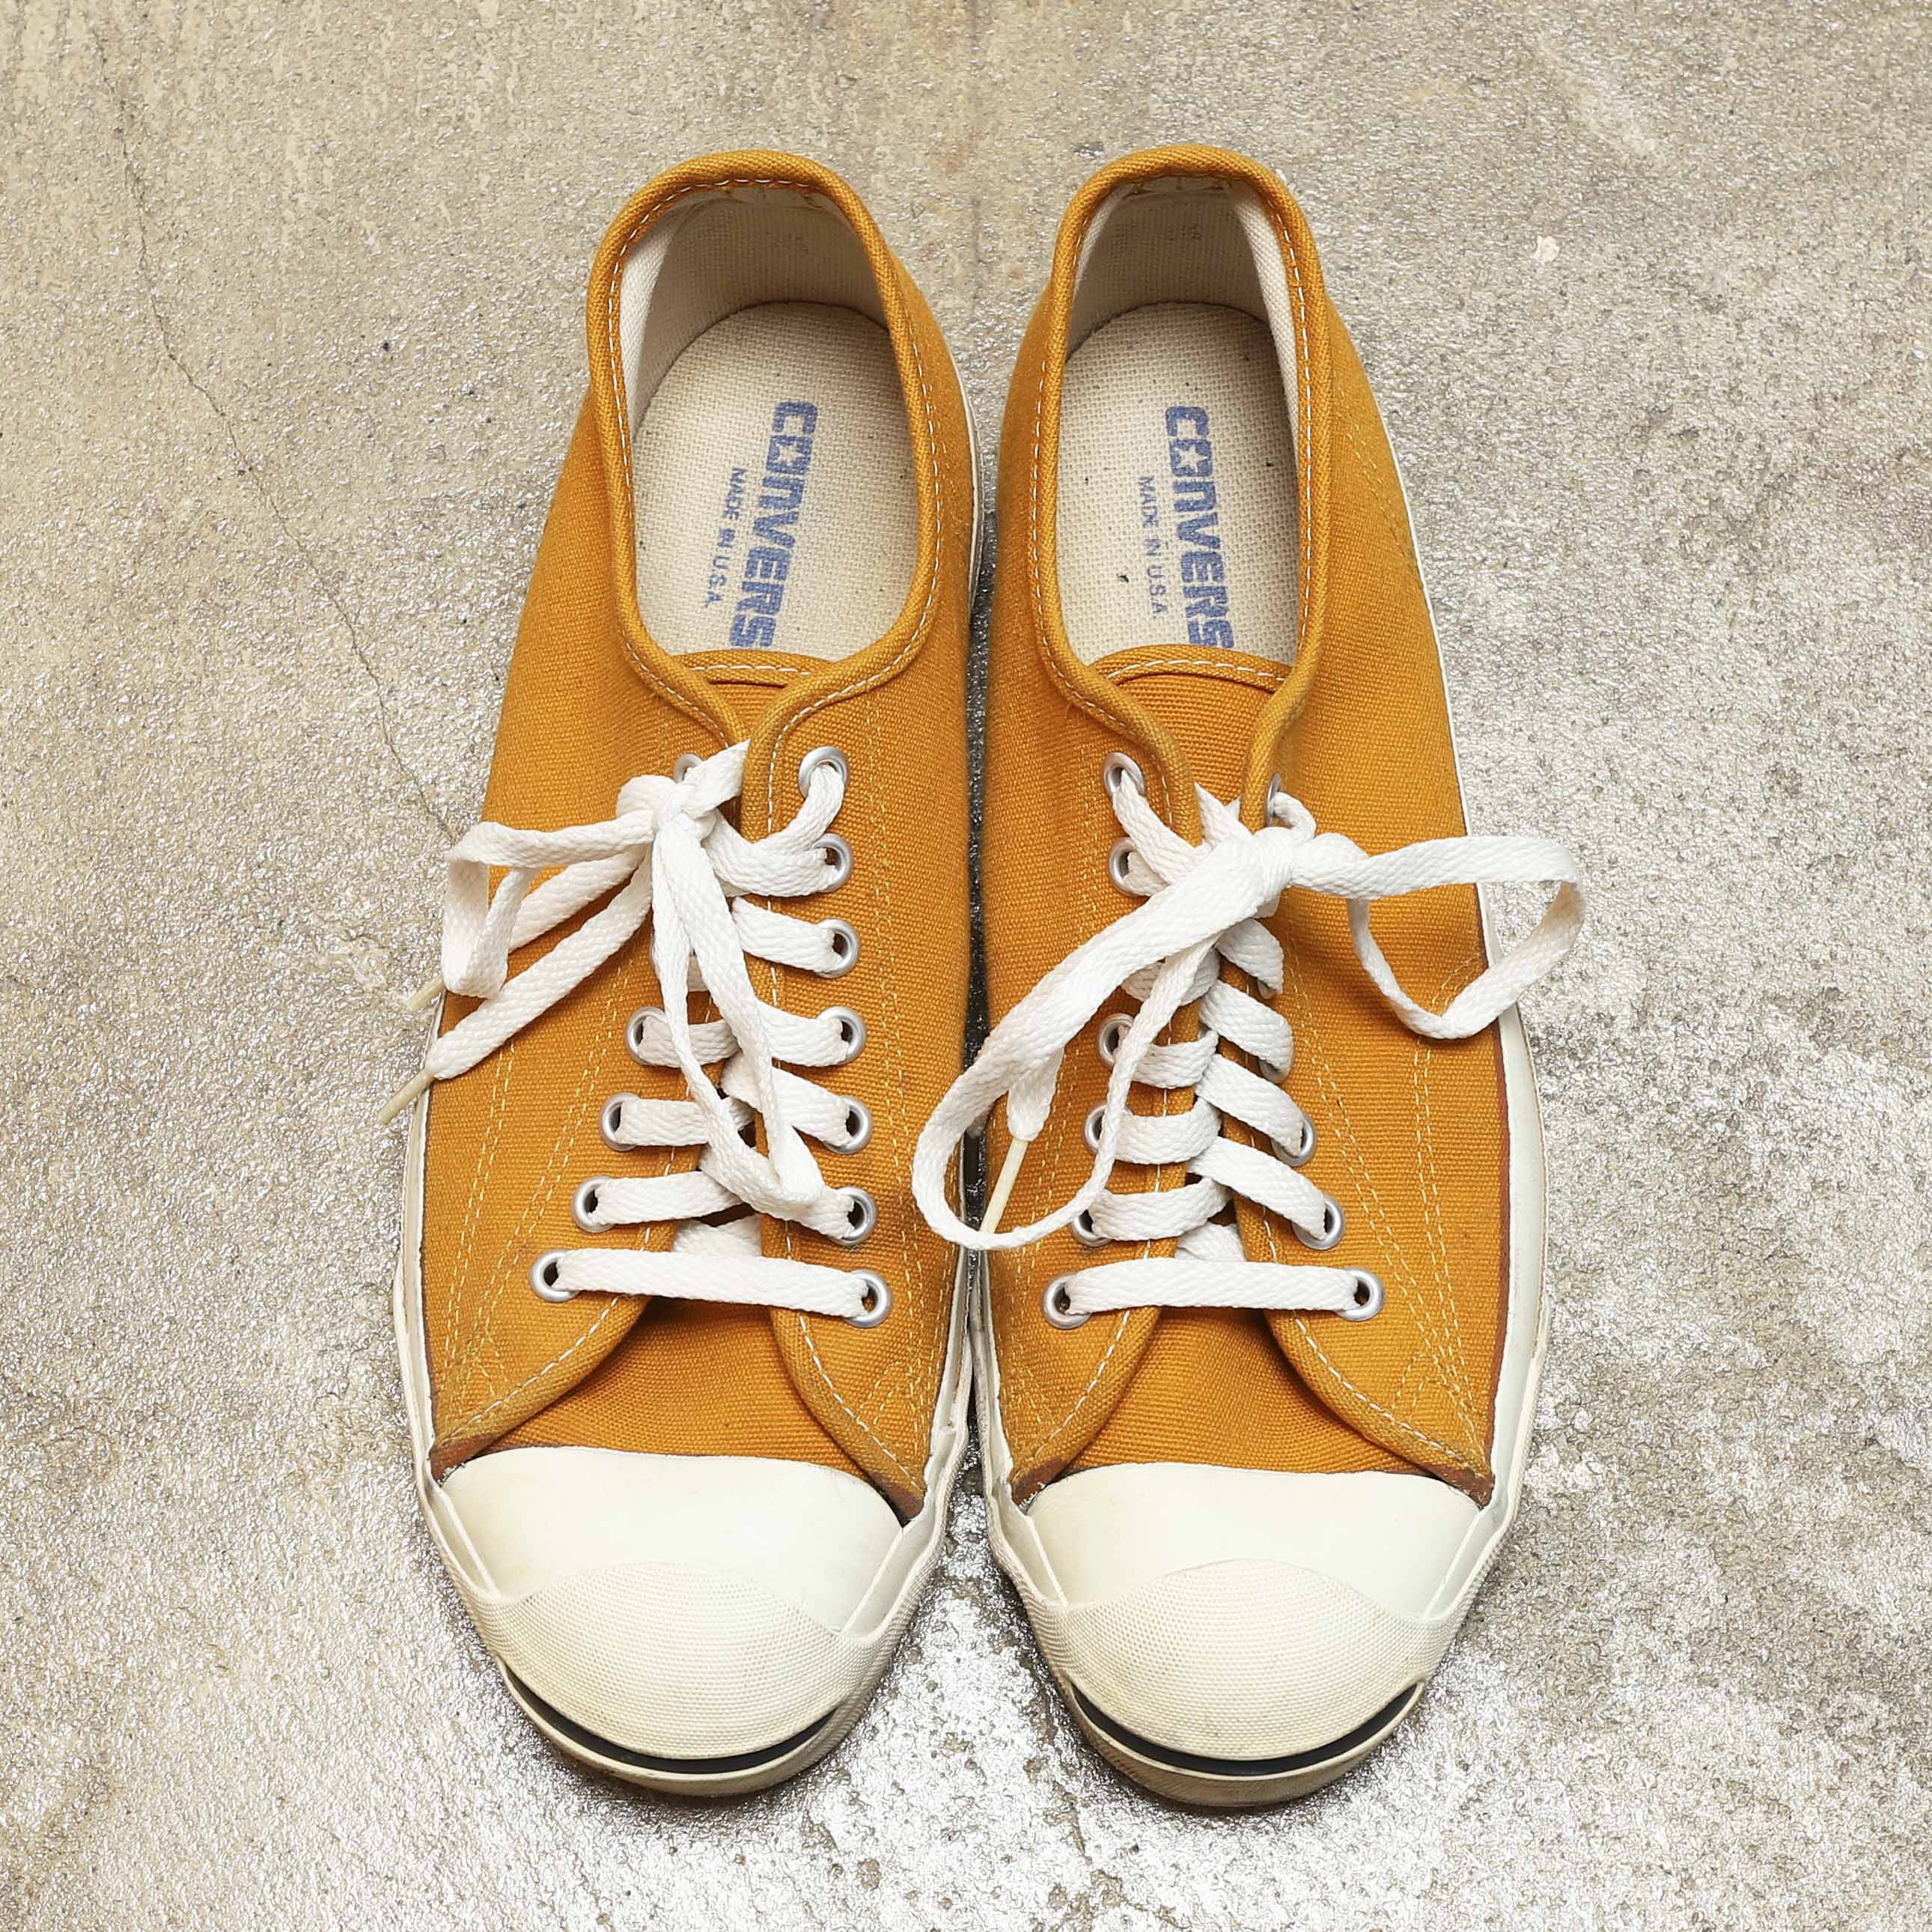 CONVERSE JACK PURCELL MADE IN USA - YELLOW